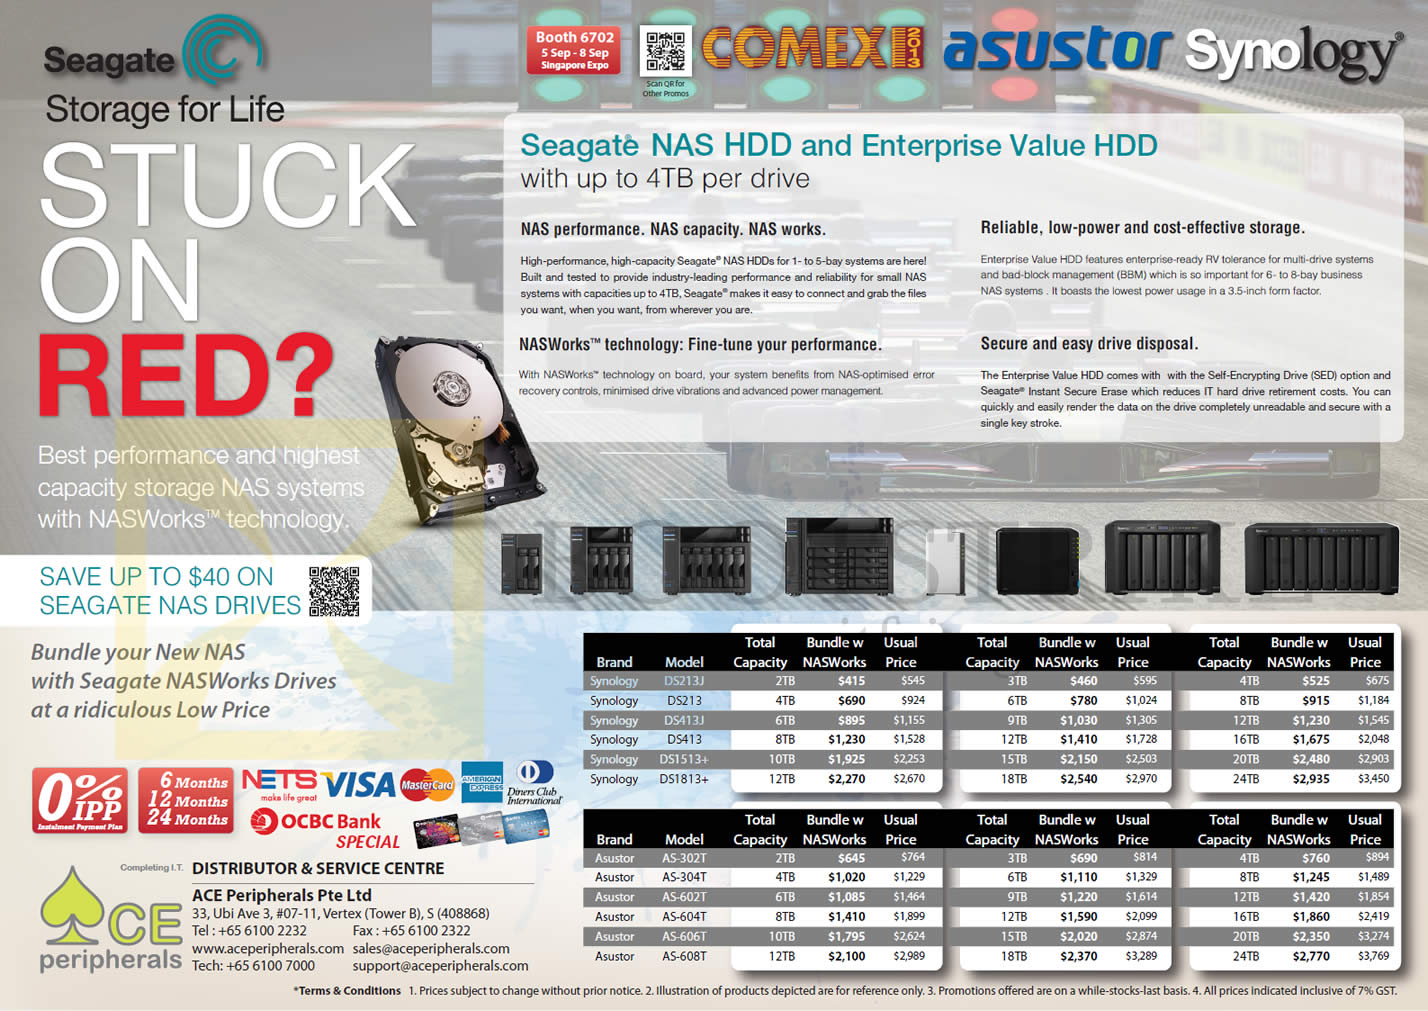 COMEX 2013 price list image brochure of Ace Peripherals Seagate NAS HDD, Enterprise HDD, NASWorks, Synology DS213J DS413 DS1513, Asustor AS-302T AS-304T AS-602T AS-604T